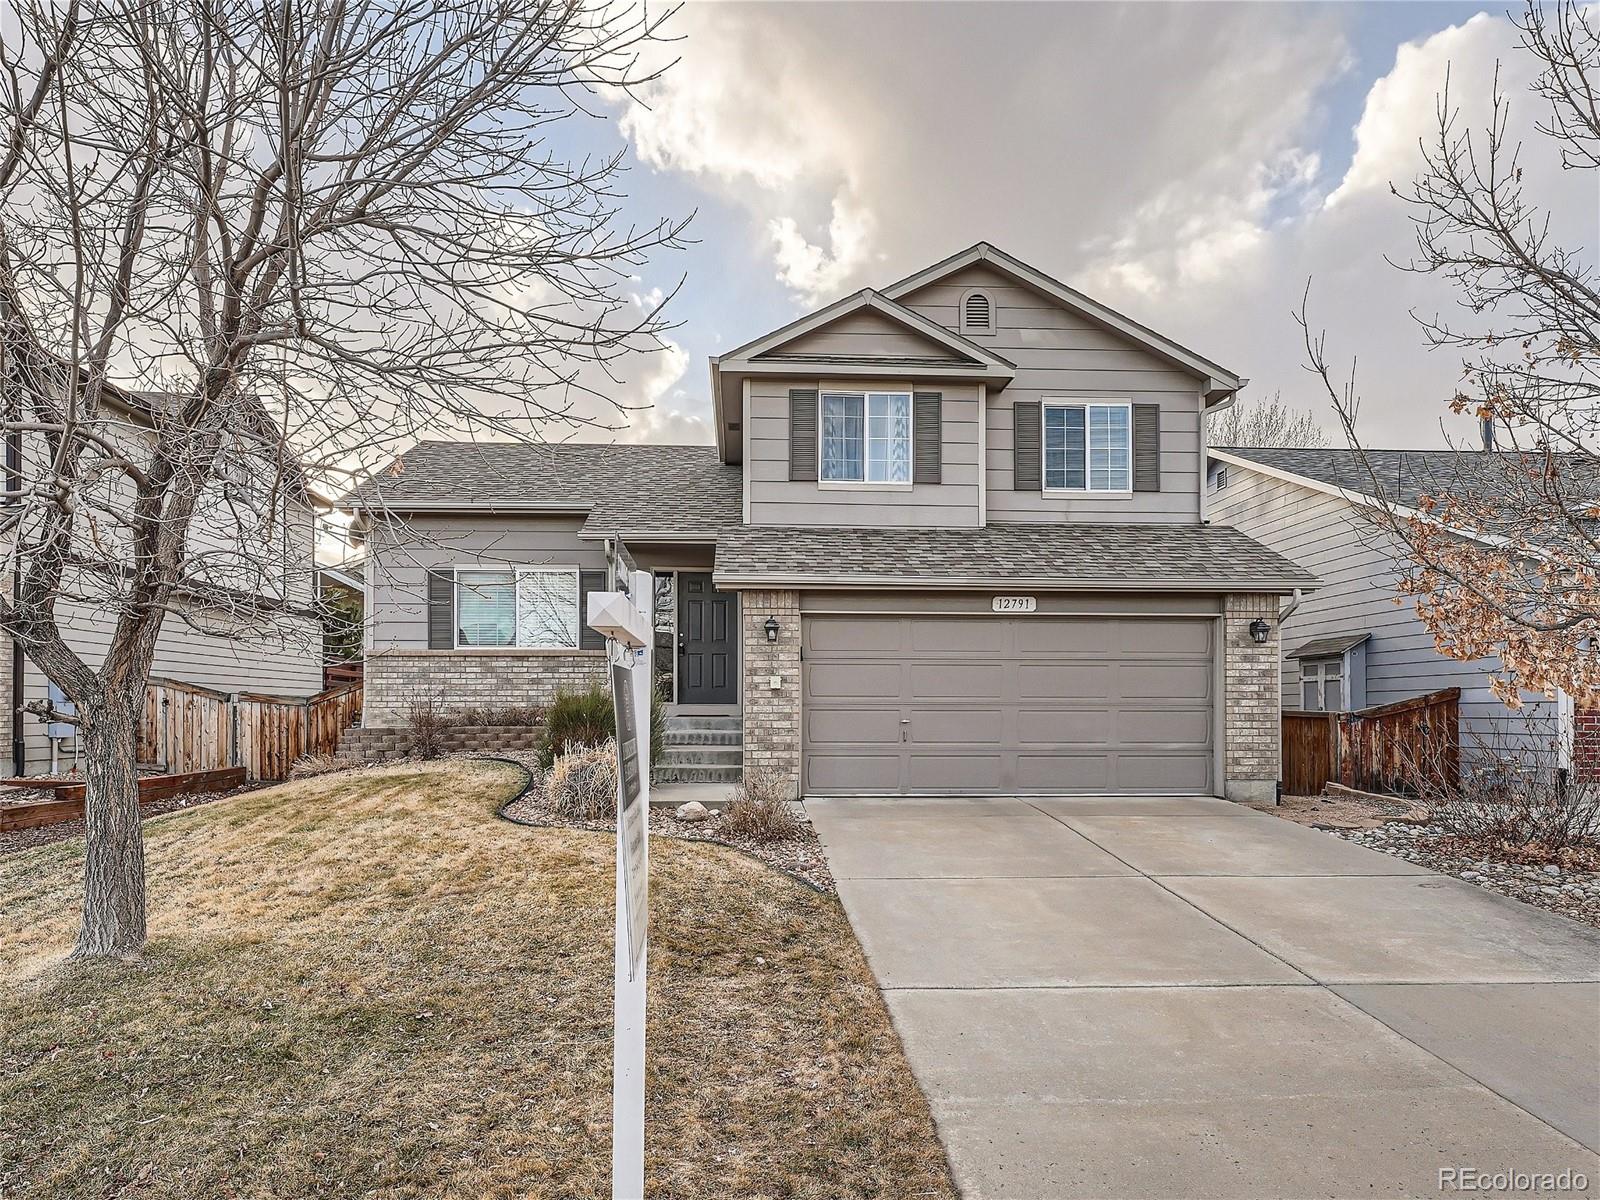 12791  buckhorn creek street, Parker sold home. Closed on 2024-04-05 for $575,000.